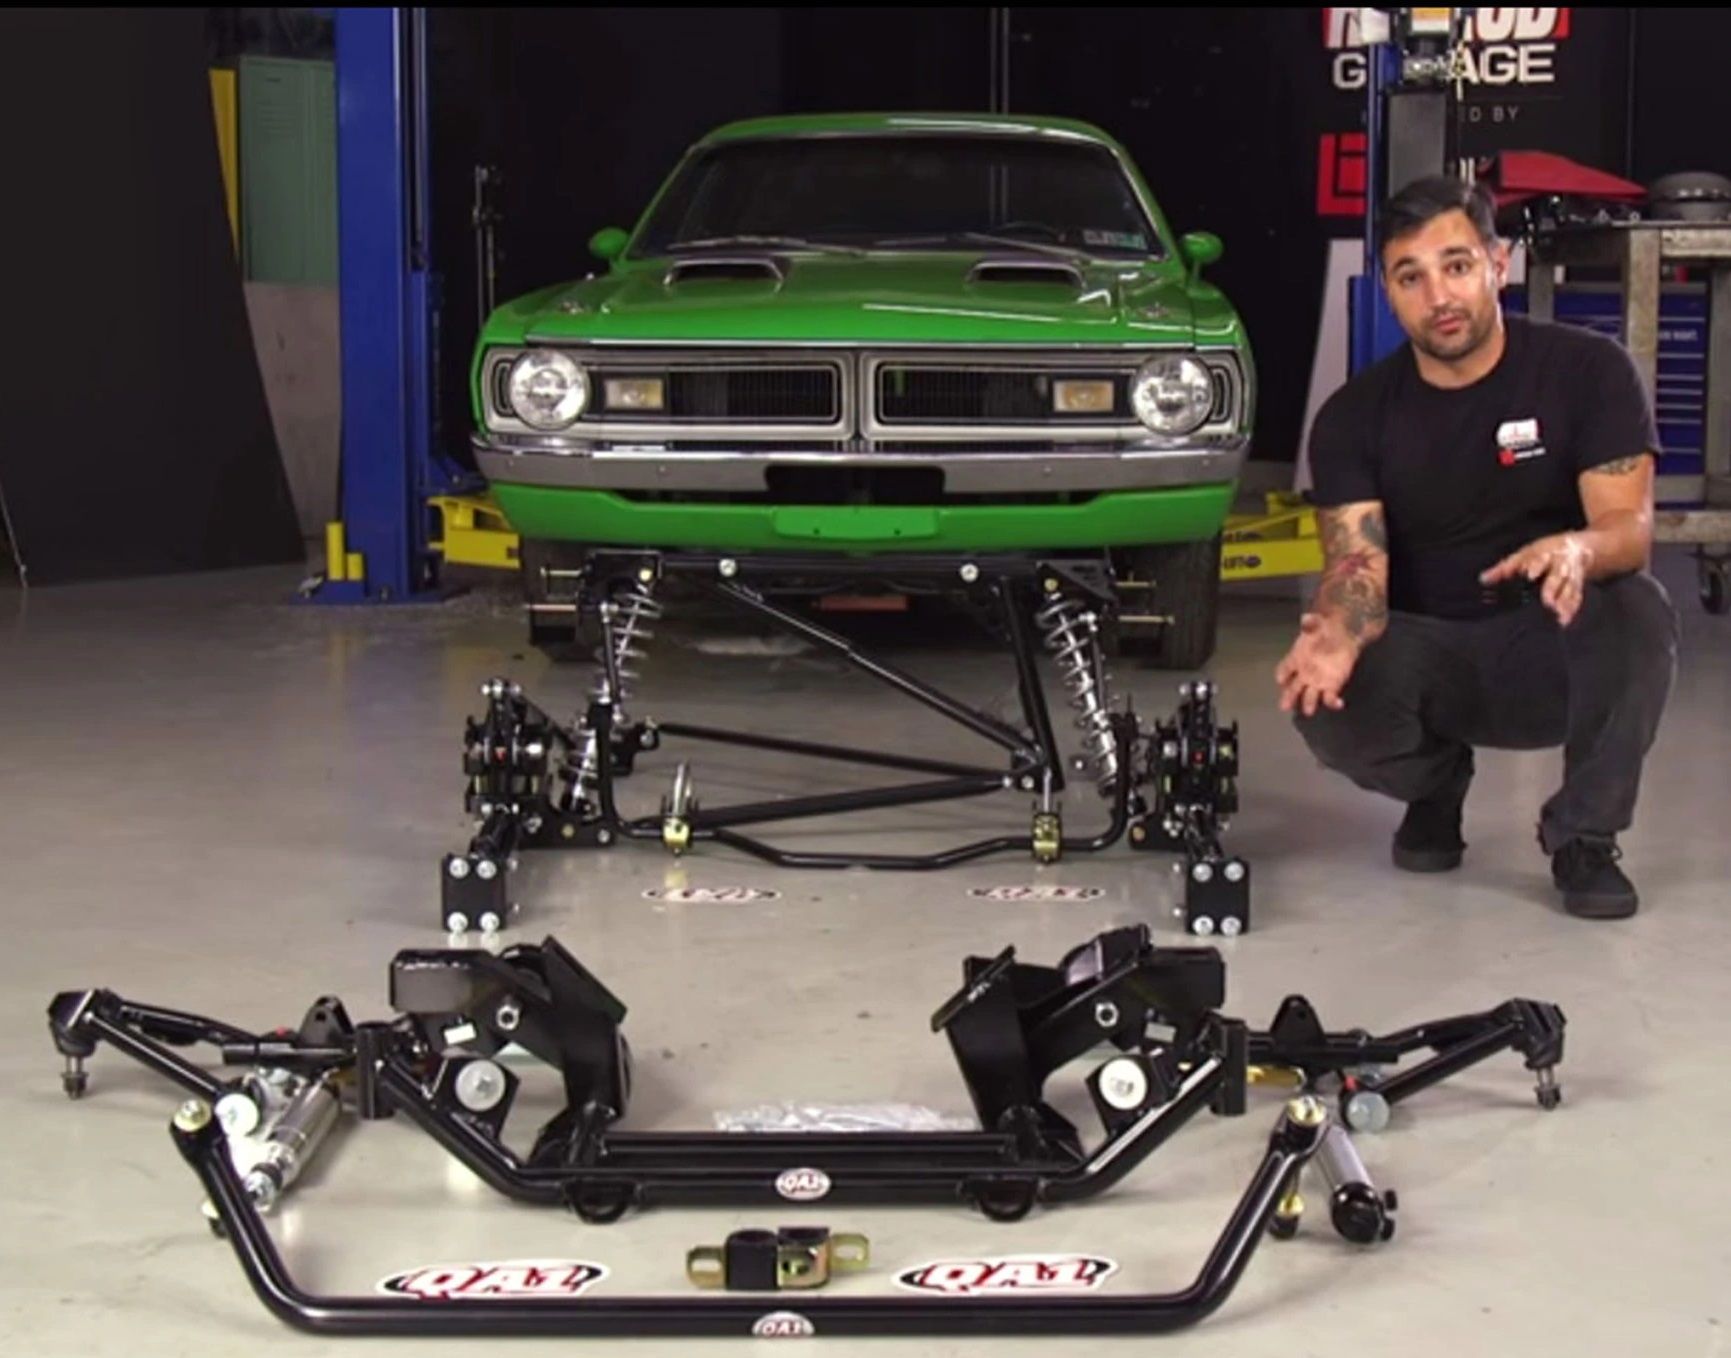 Check out Tony Angelo's first car: A 1971 Dodge Dart Demon restored on Hot Rod Garage